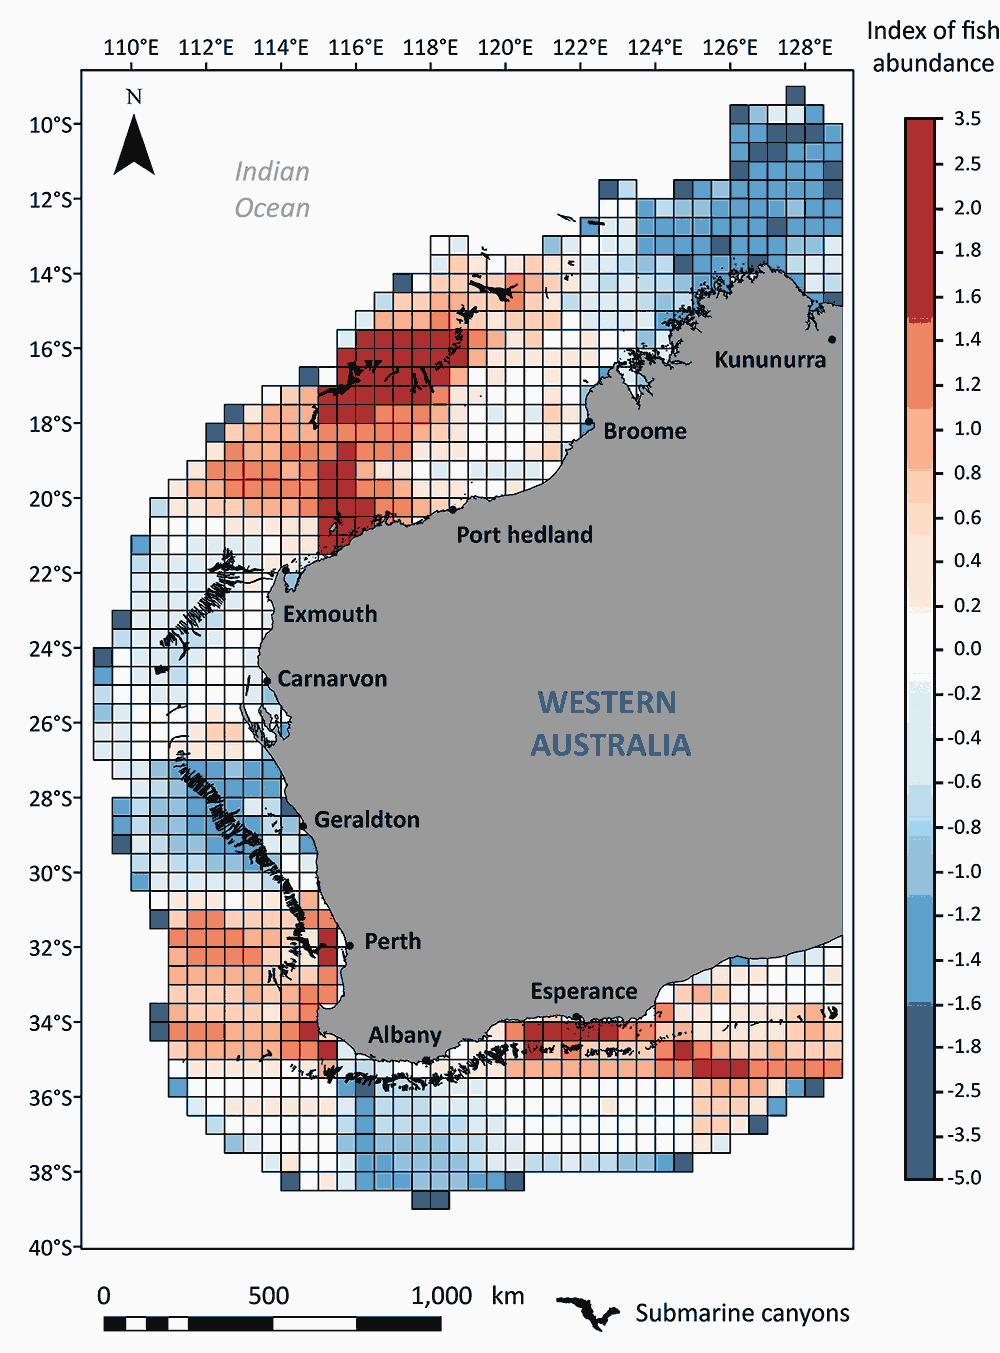 Chart showing Western Australia and grid of predicted fish abundance.